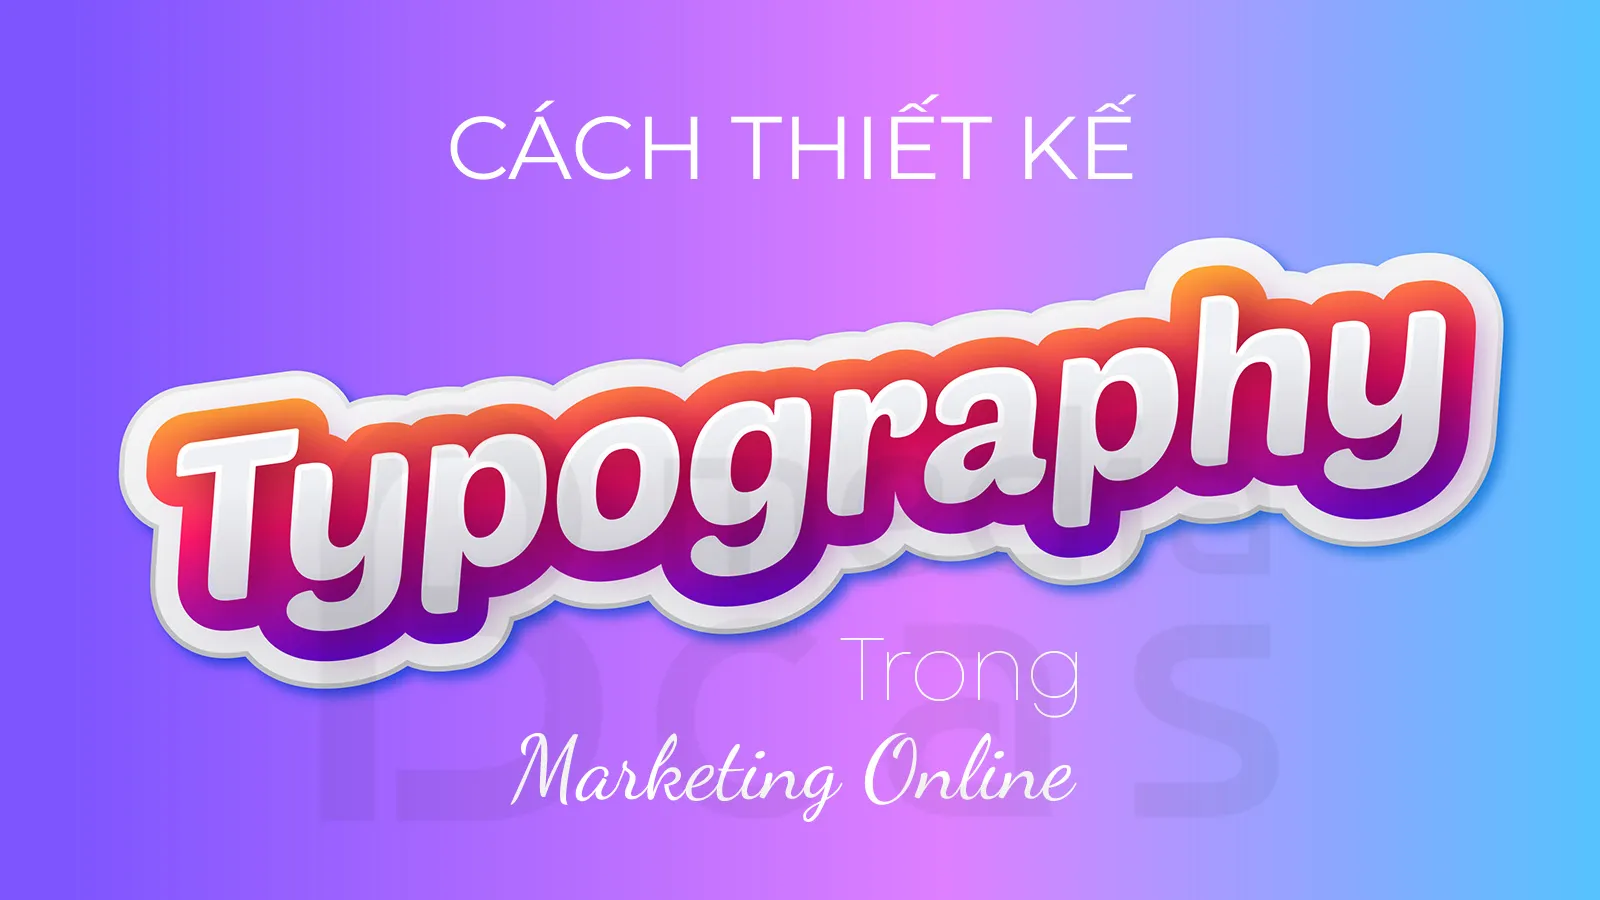 Cach-thiet-ke-typography-trong-marketing-online